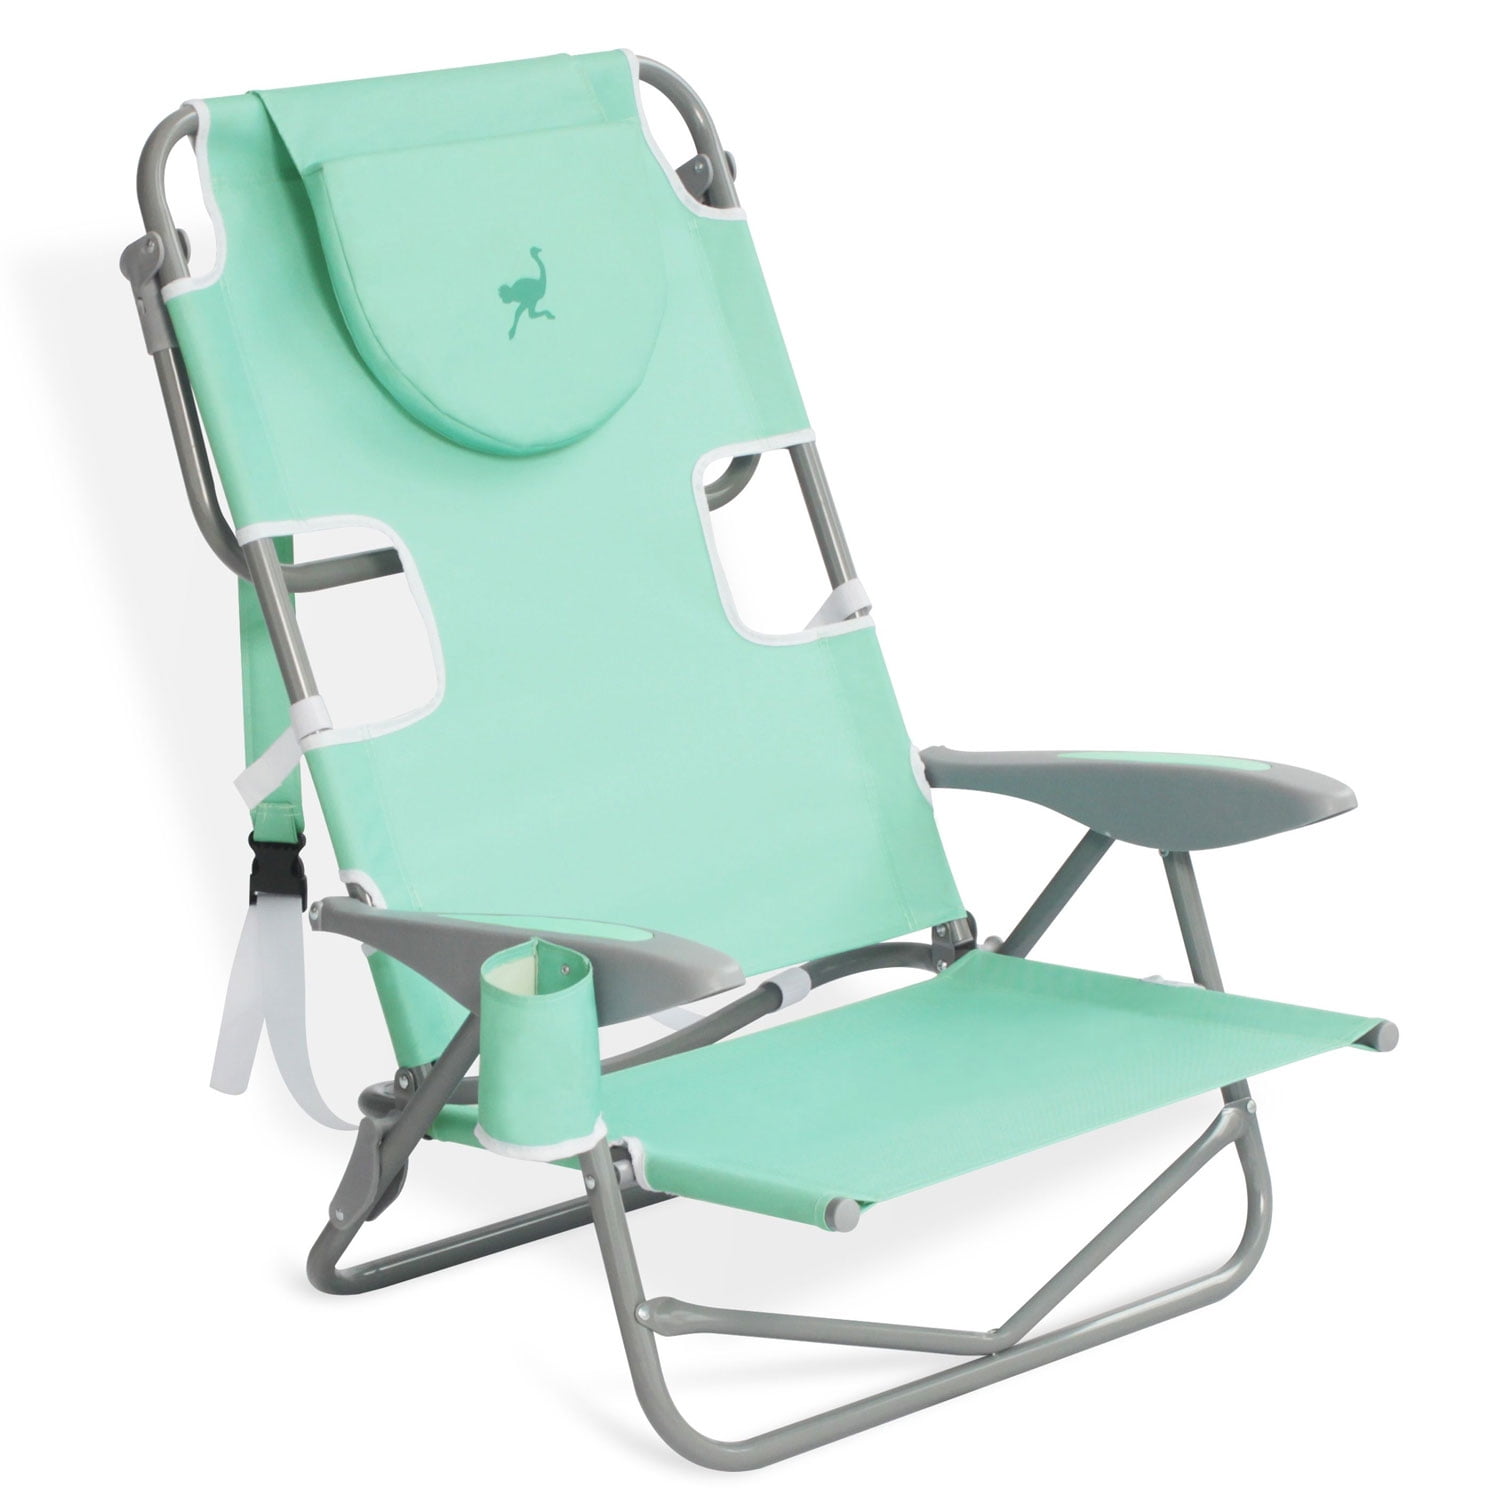 New Teal Beach Chair for Large Space